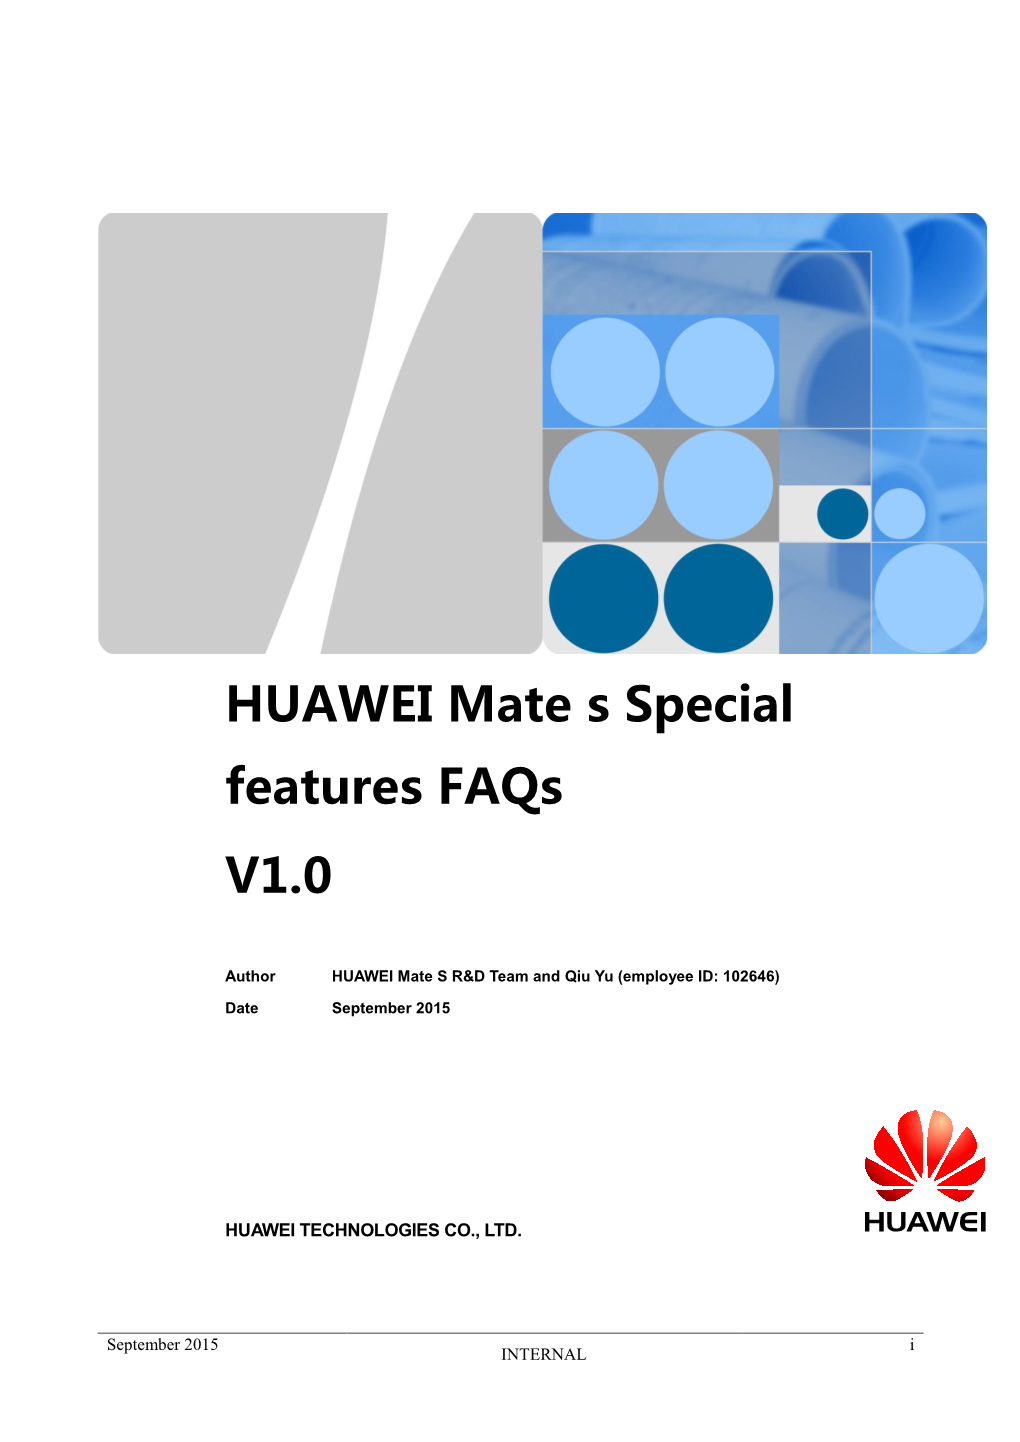 HUAWEI Mate S Special Features Faqs V1.0